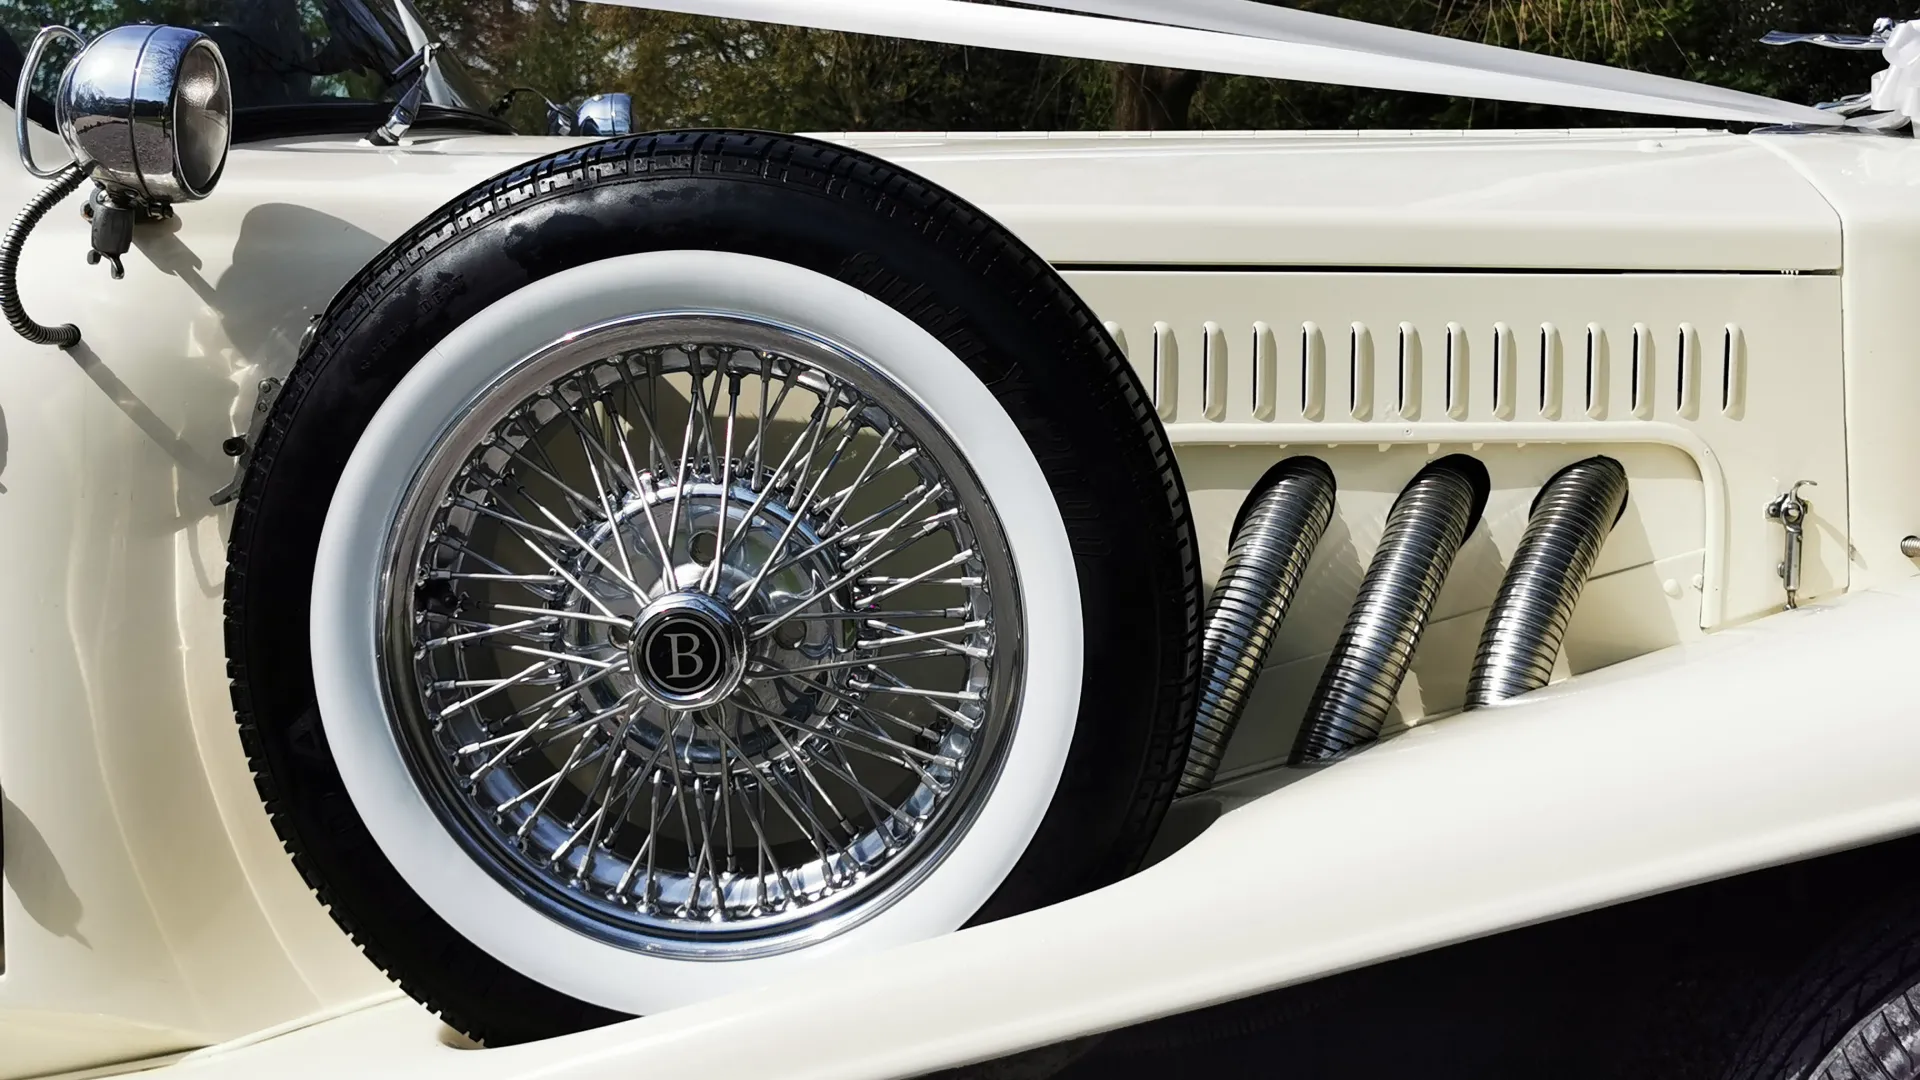 Front side view of the beauford showing the spare mounted wheel with white wall tires